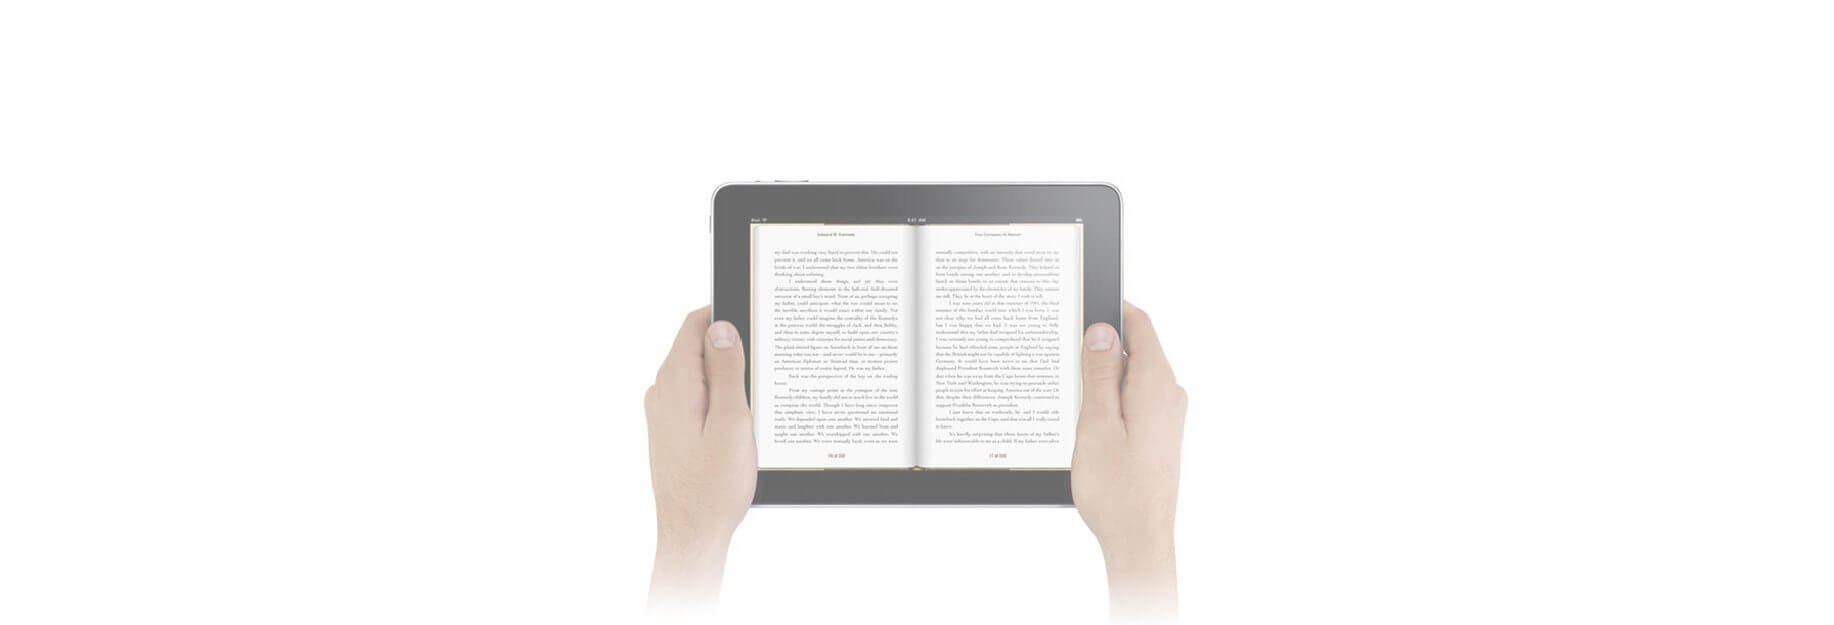 How to read and listen with Walmart eBooks